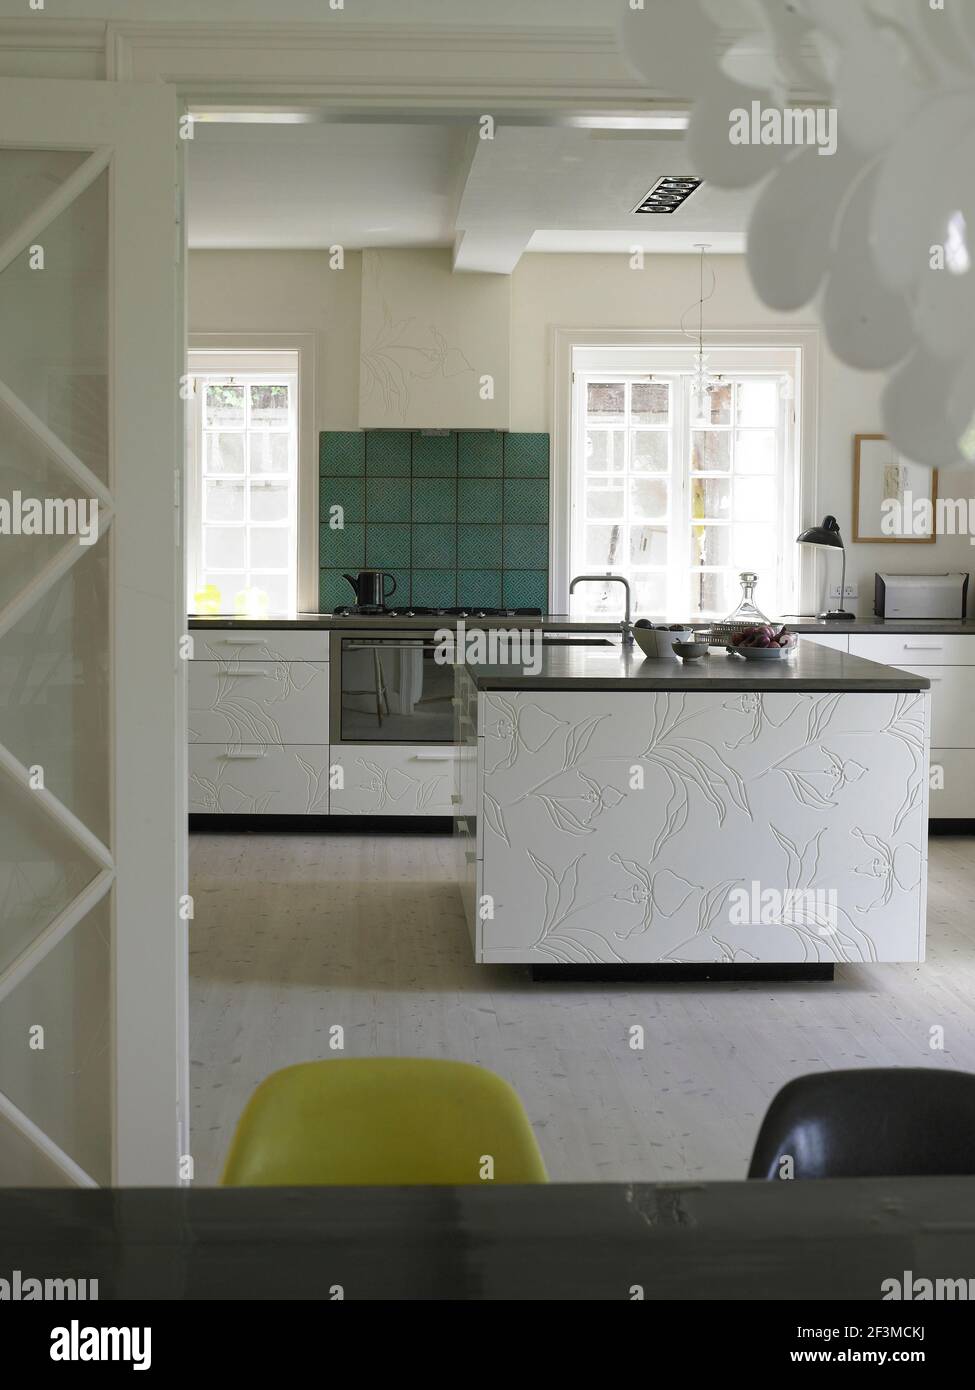 Kitchen island and uncurtained windows in residential home, Denmark Stock Photo